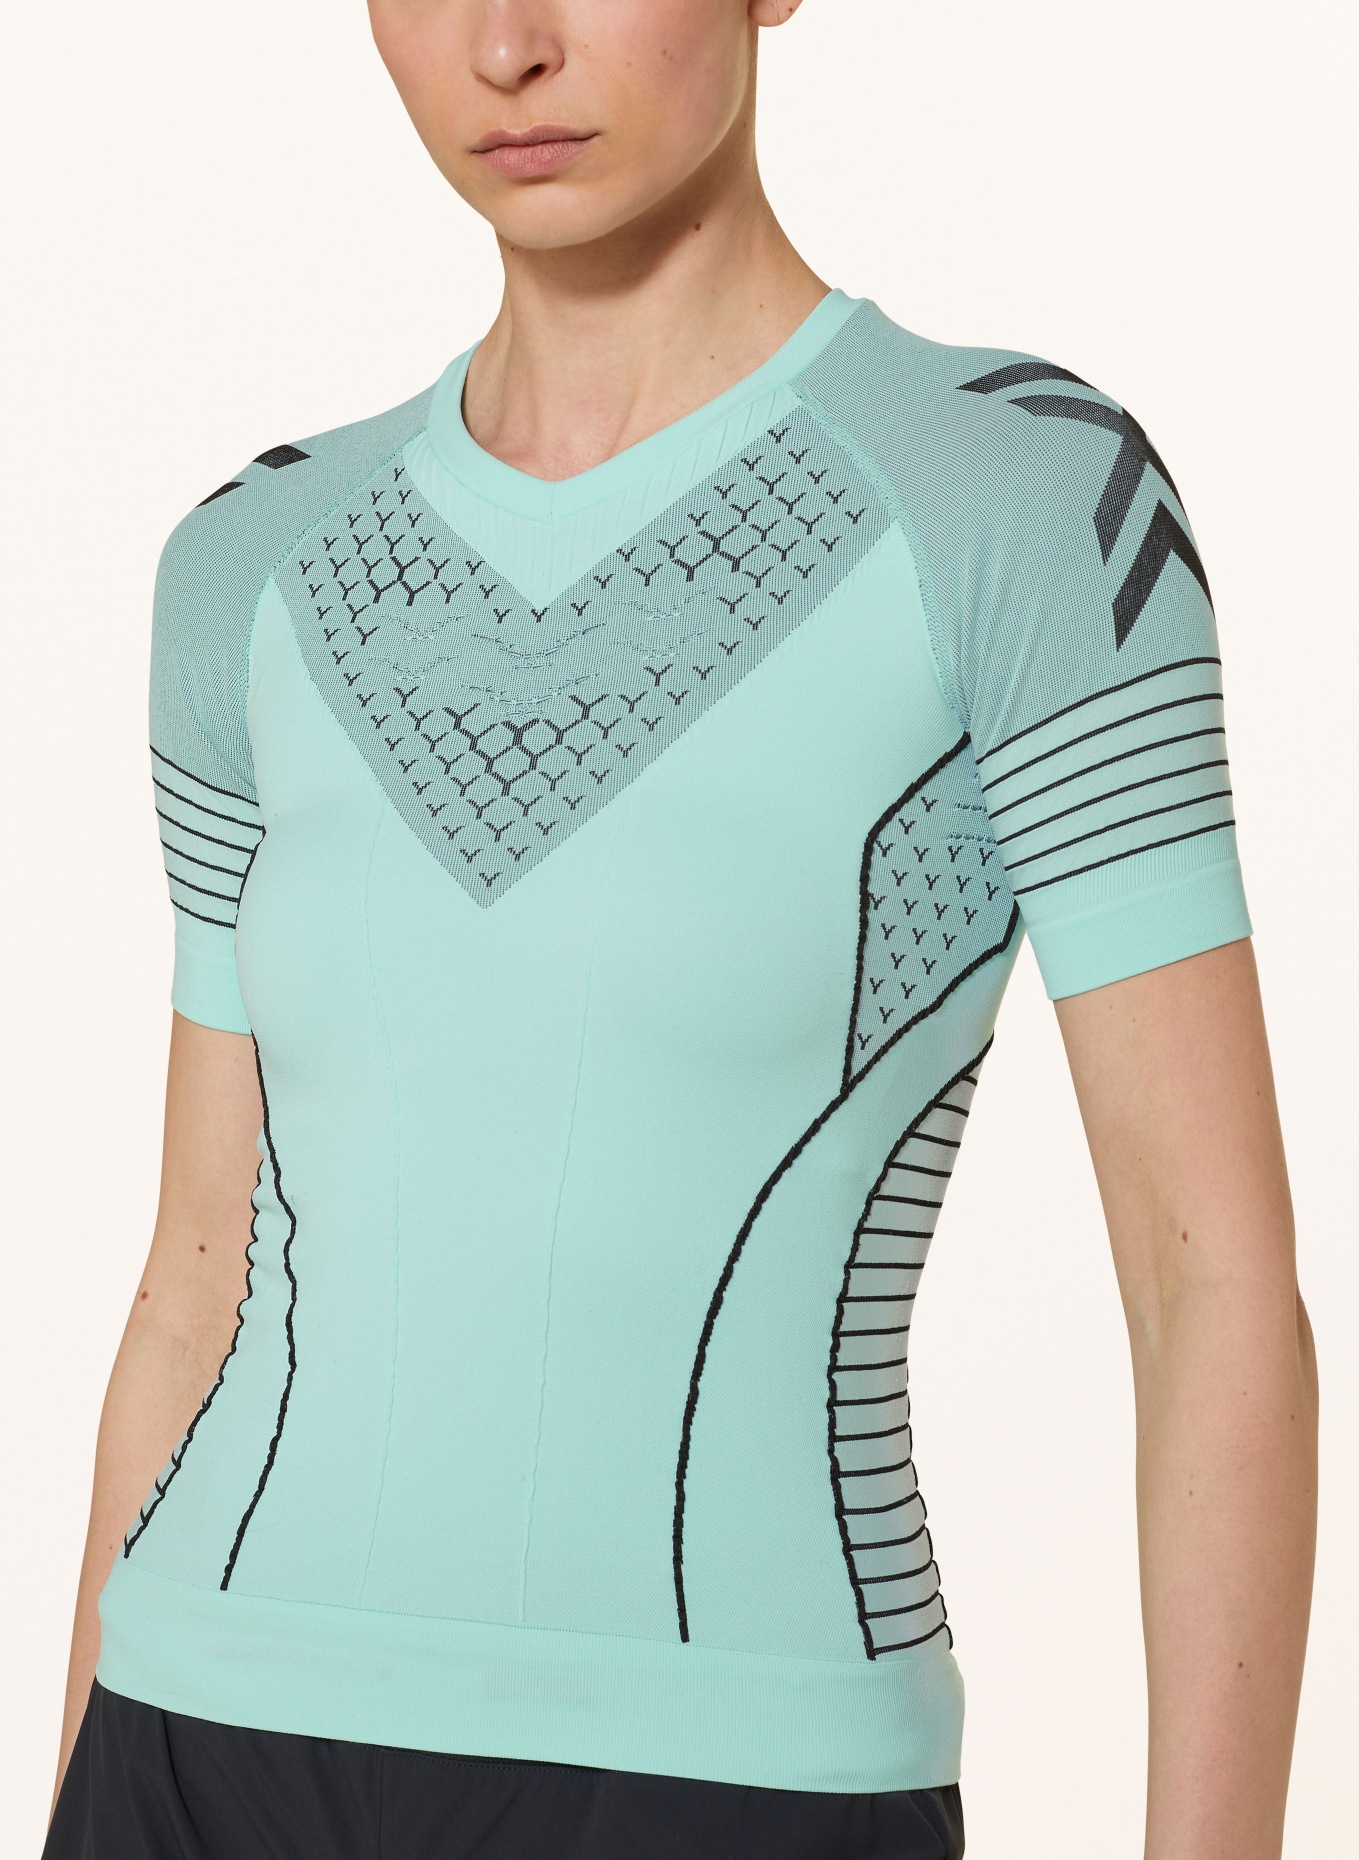 X-BIONIC Functional underwear shirt TWYCE RACE, Color: TURQUOISE/ BLACK (Image 4)